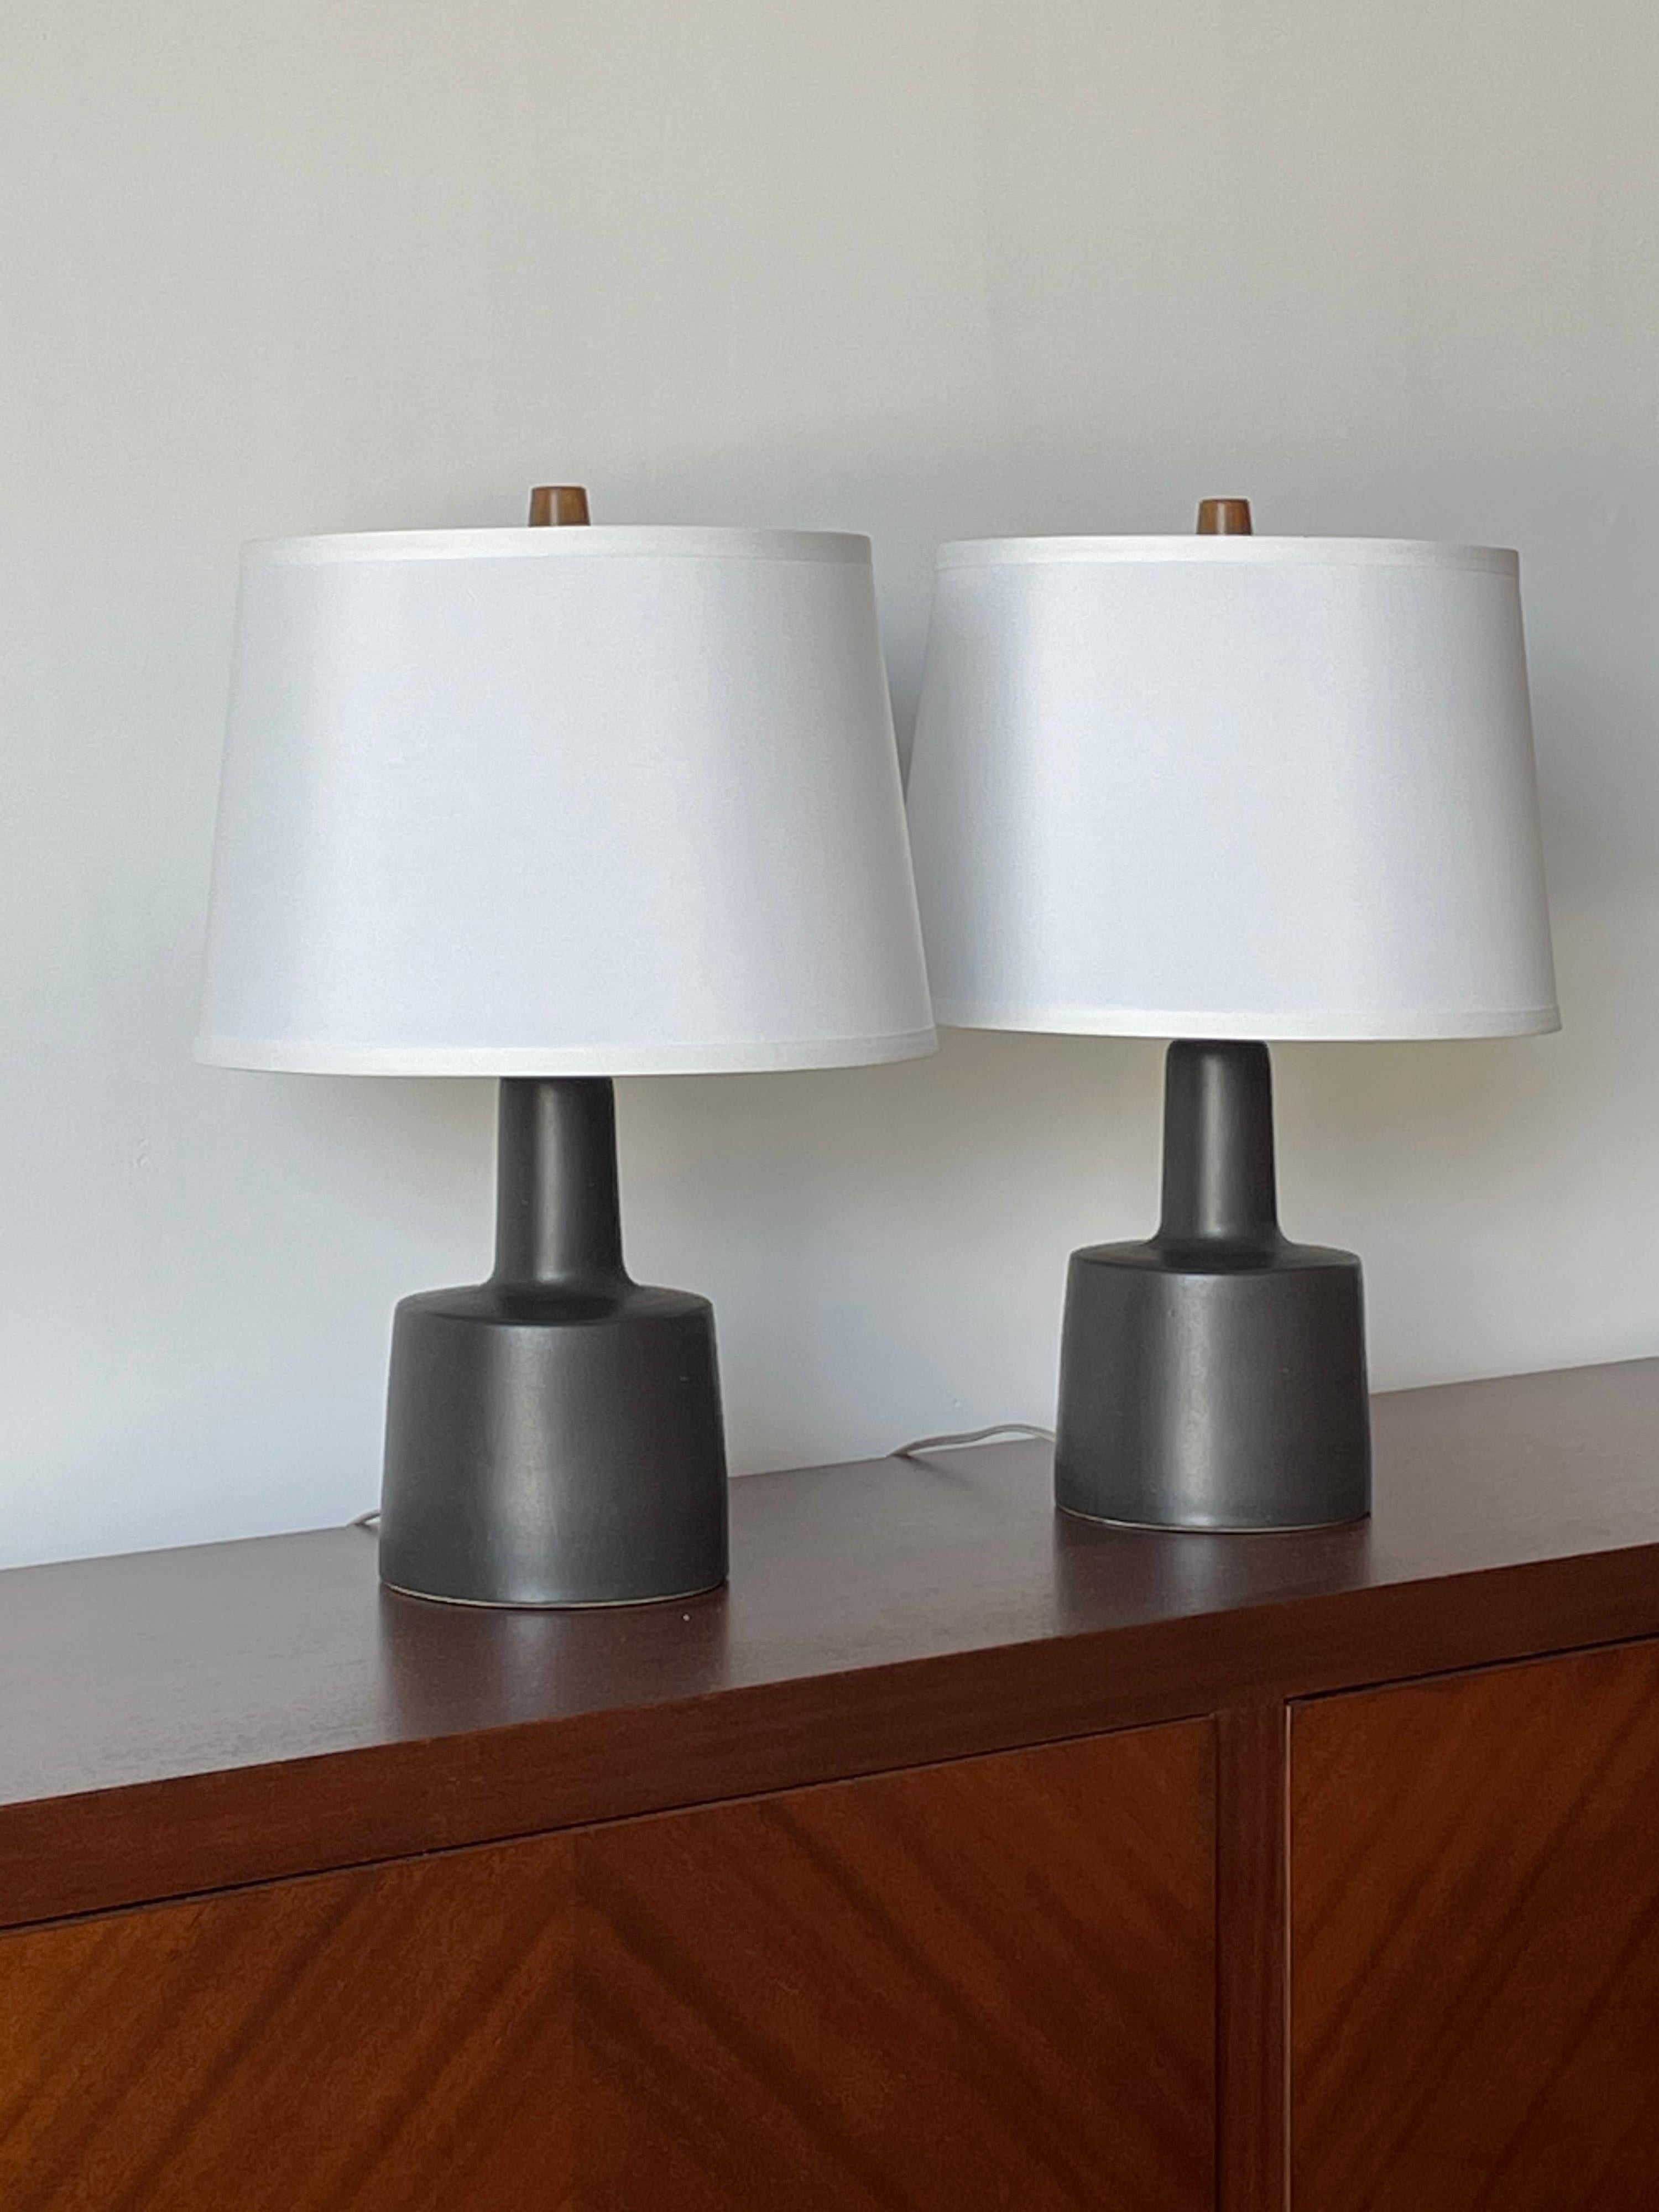 Wonderful pair of matte black ceramic table lamps by famed ceramicist duo Jane and Gordon Martz for Marshall Studios. Elegant and timeless design would work well in a variety of aesthetics- Boho chic, modern, mid century, contemporary,